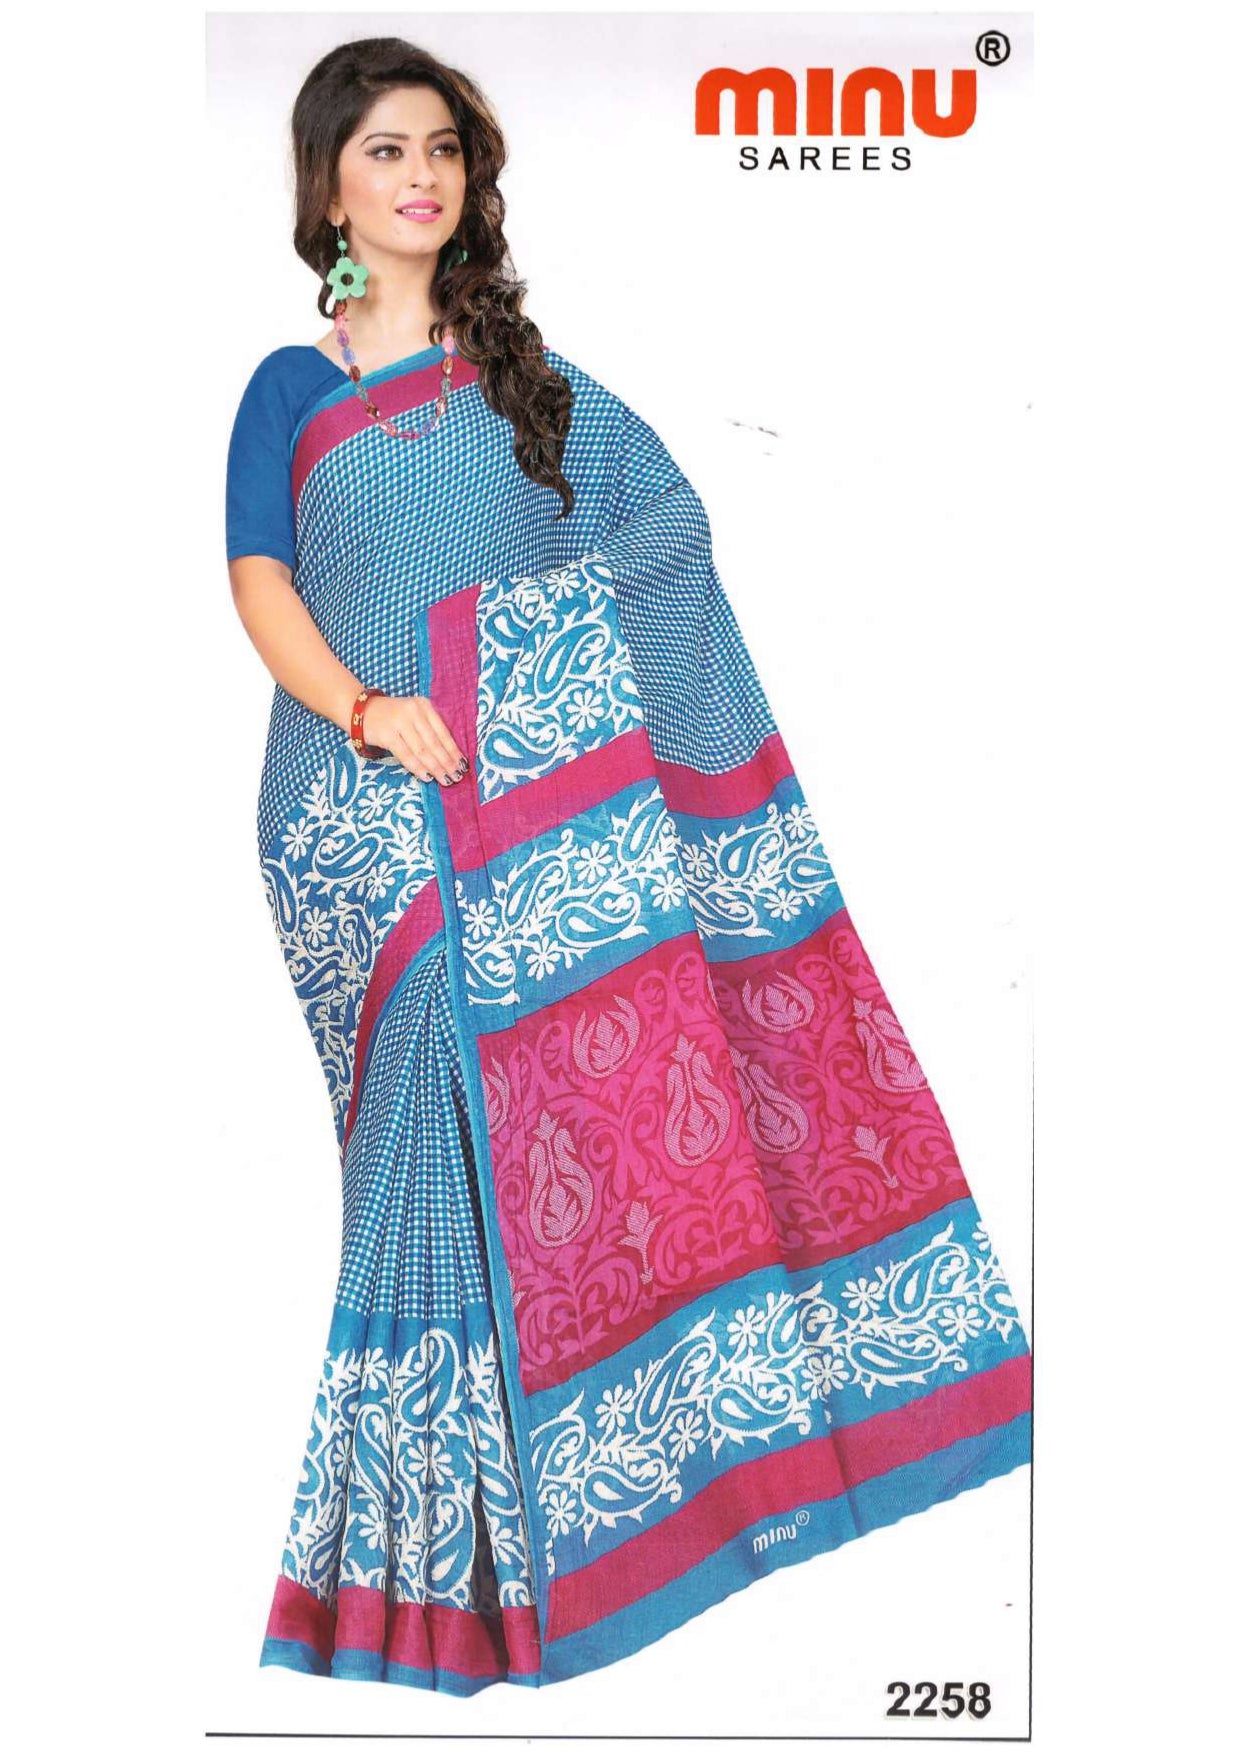 Woman wearing most fashionable printed saree at best prices